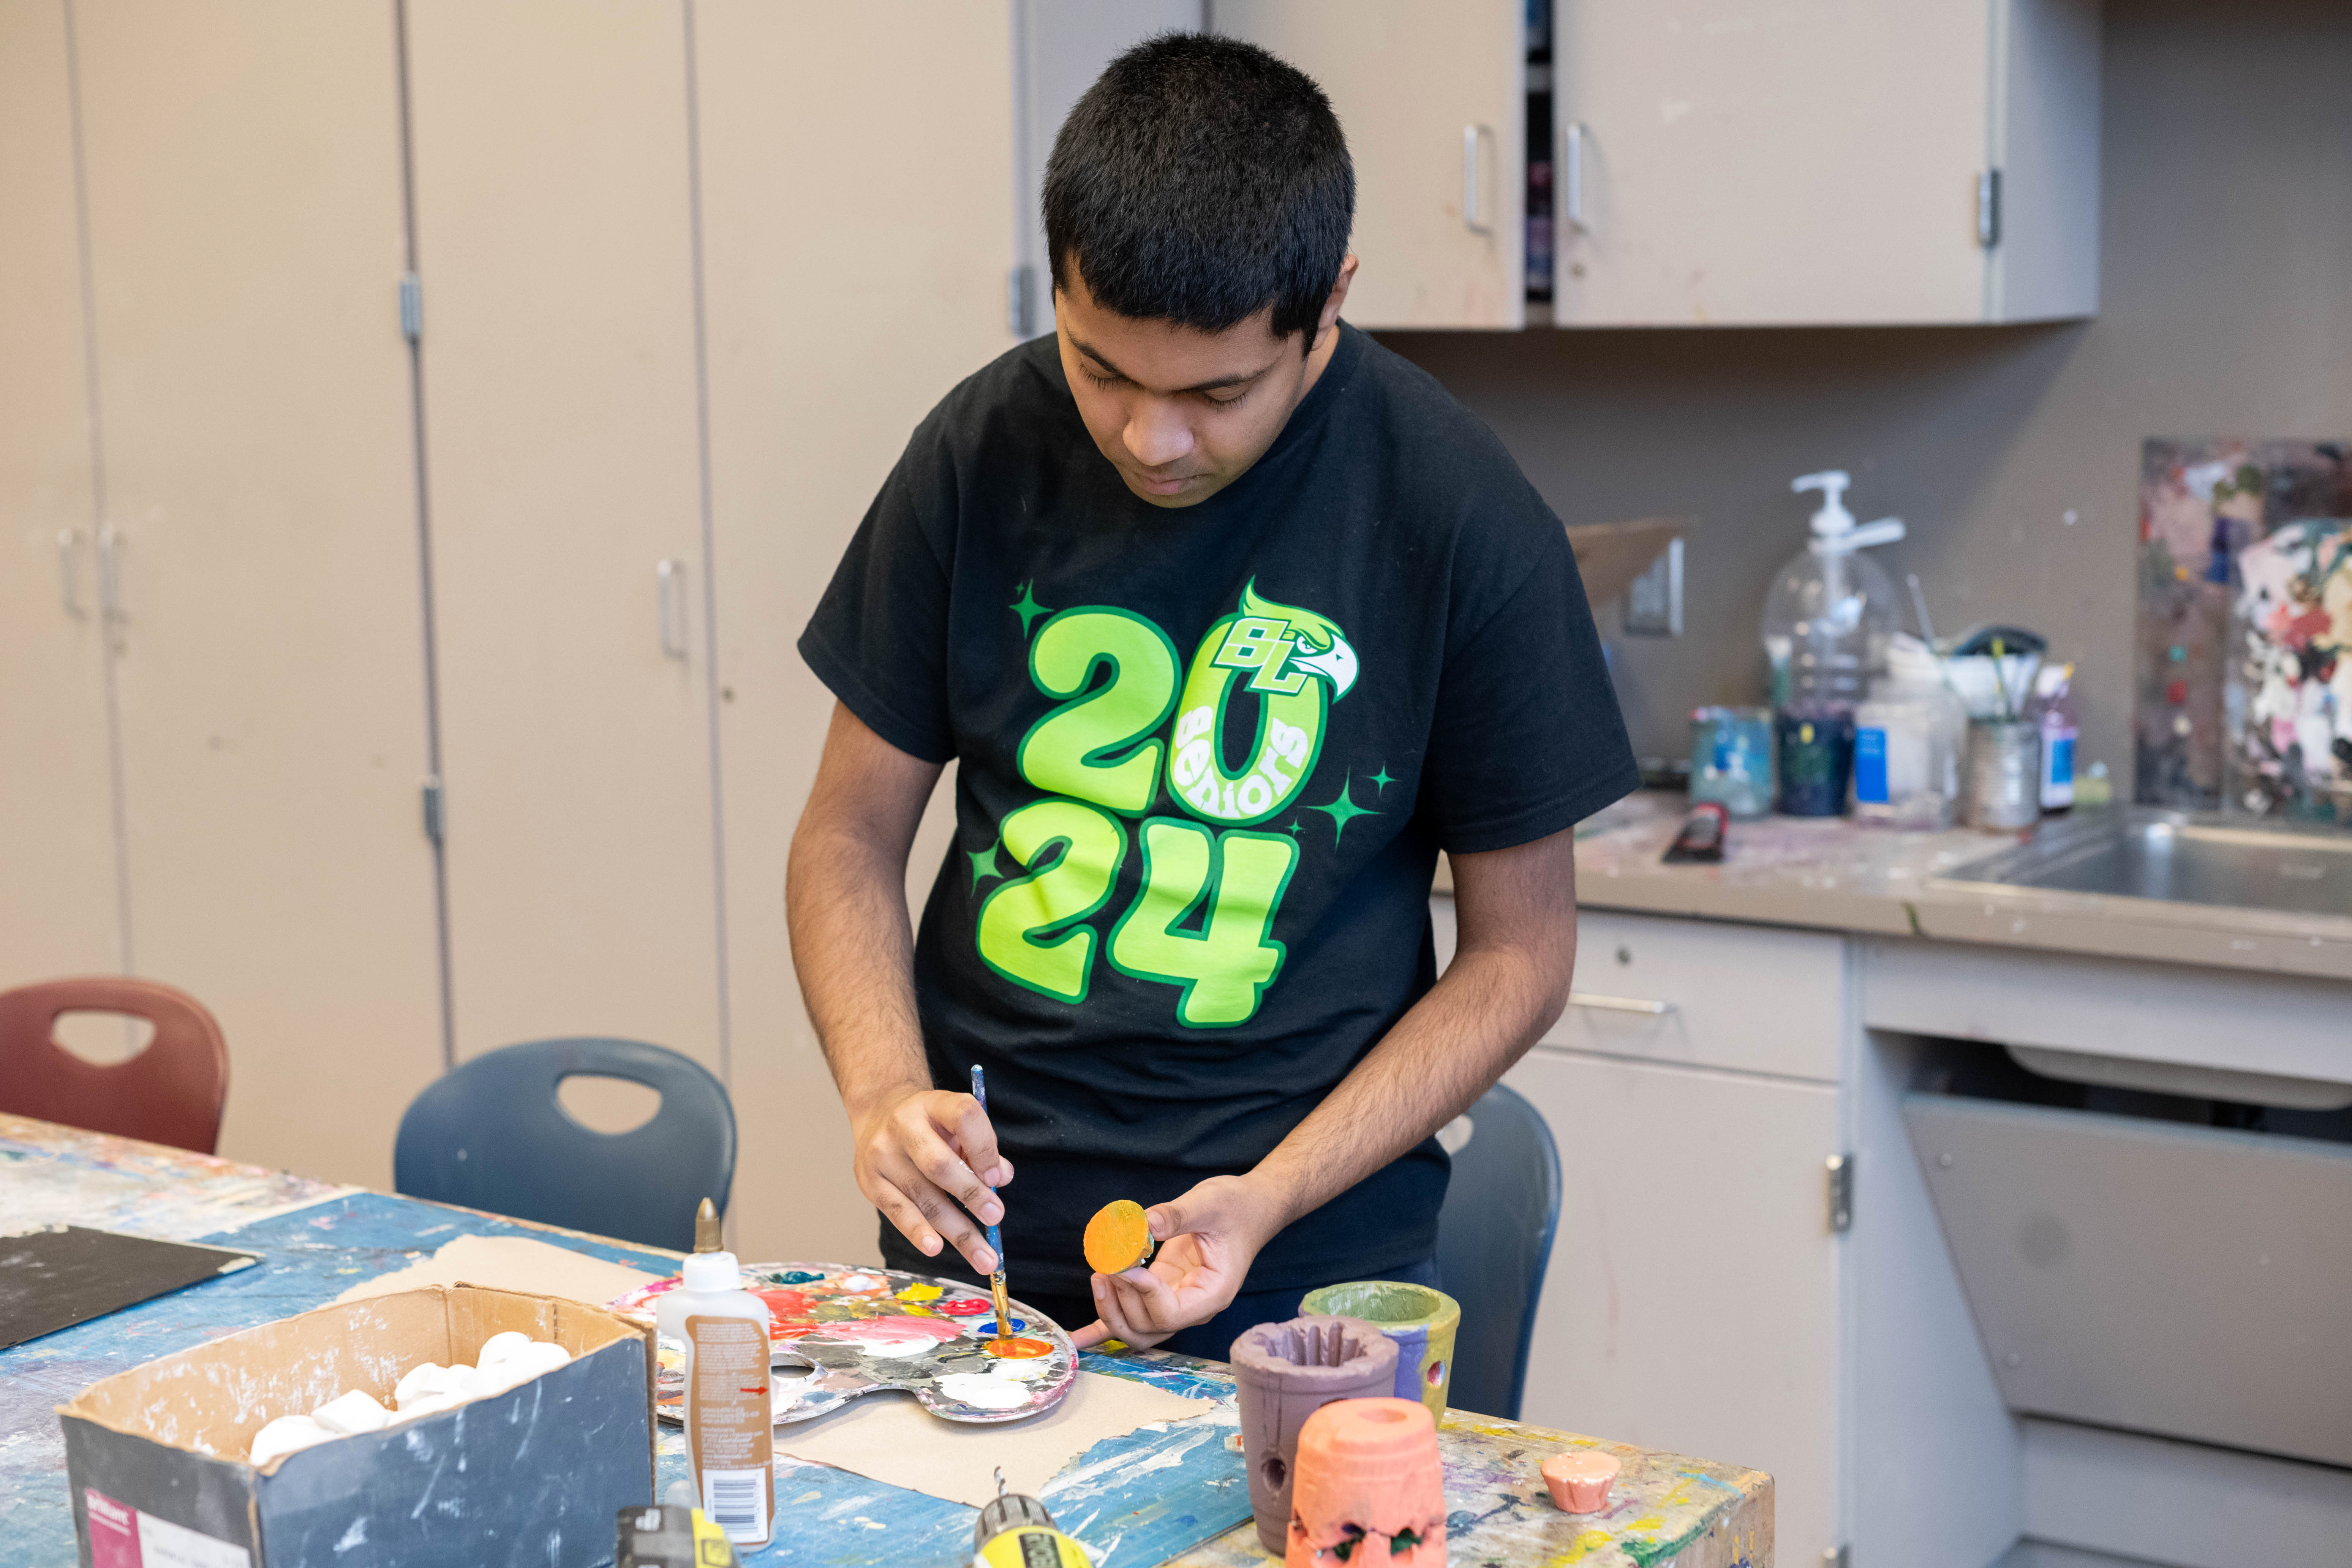 A student paints a small piece of baked clay. he dips his brush into orange paint on a palate. The flat bottom of the clay piece is the same color orange.